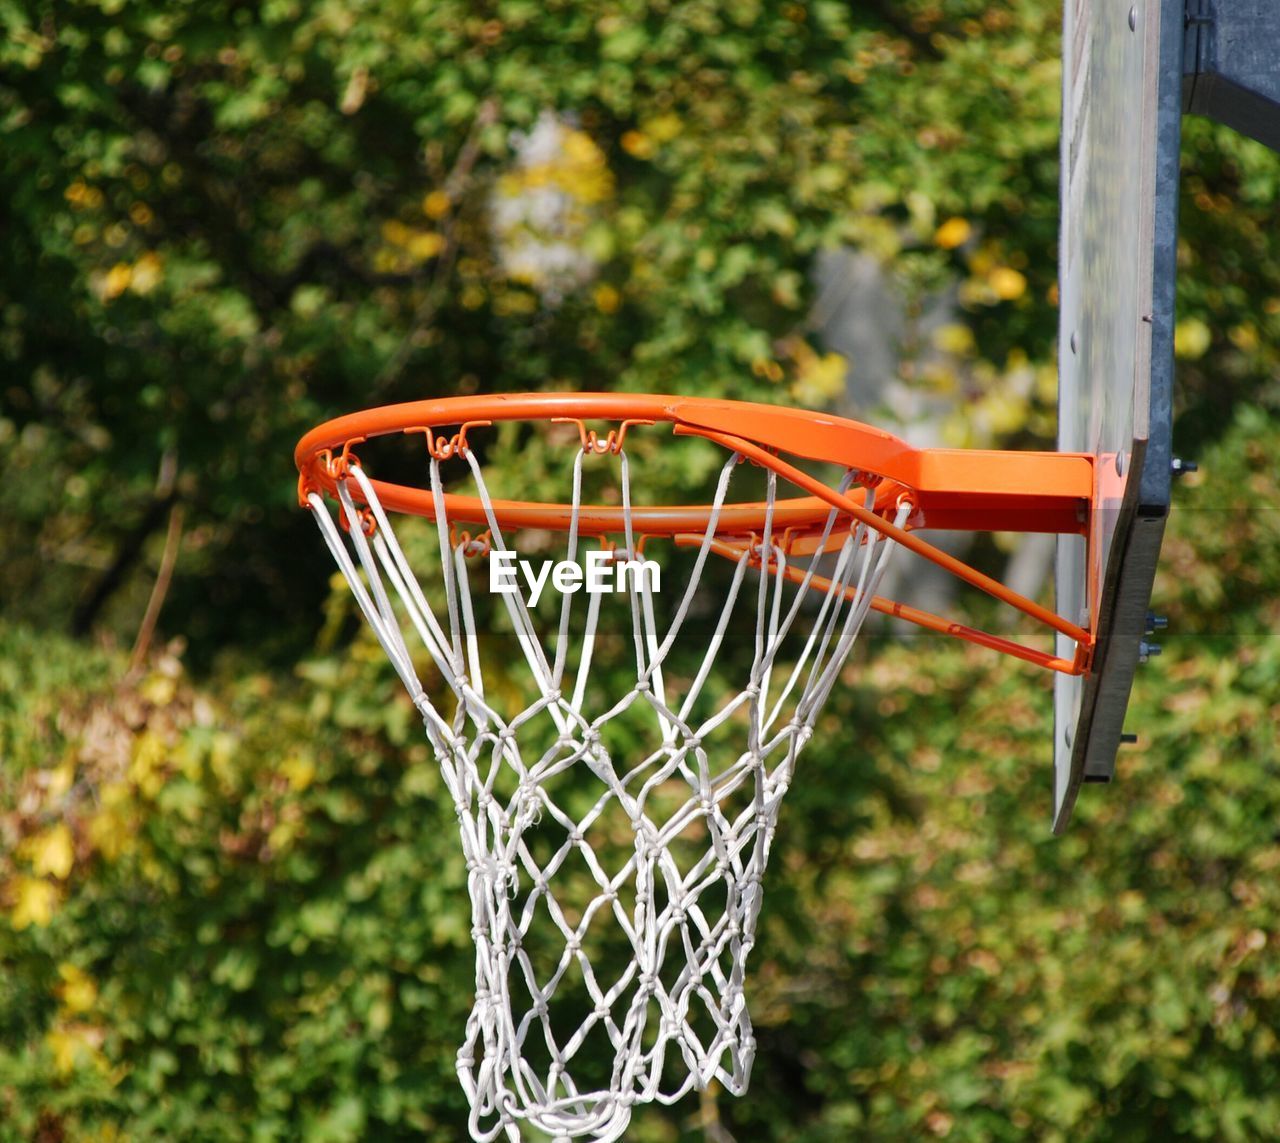 CLOSE-UP OF BASKETBALL HOOP AGAINST TREE